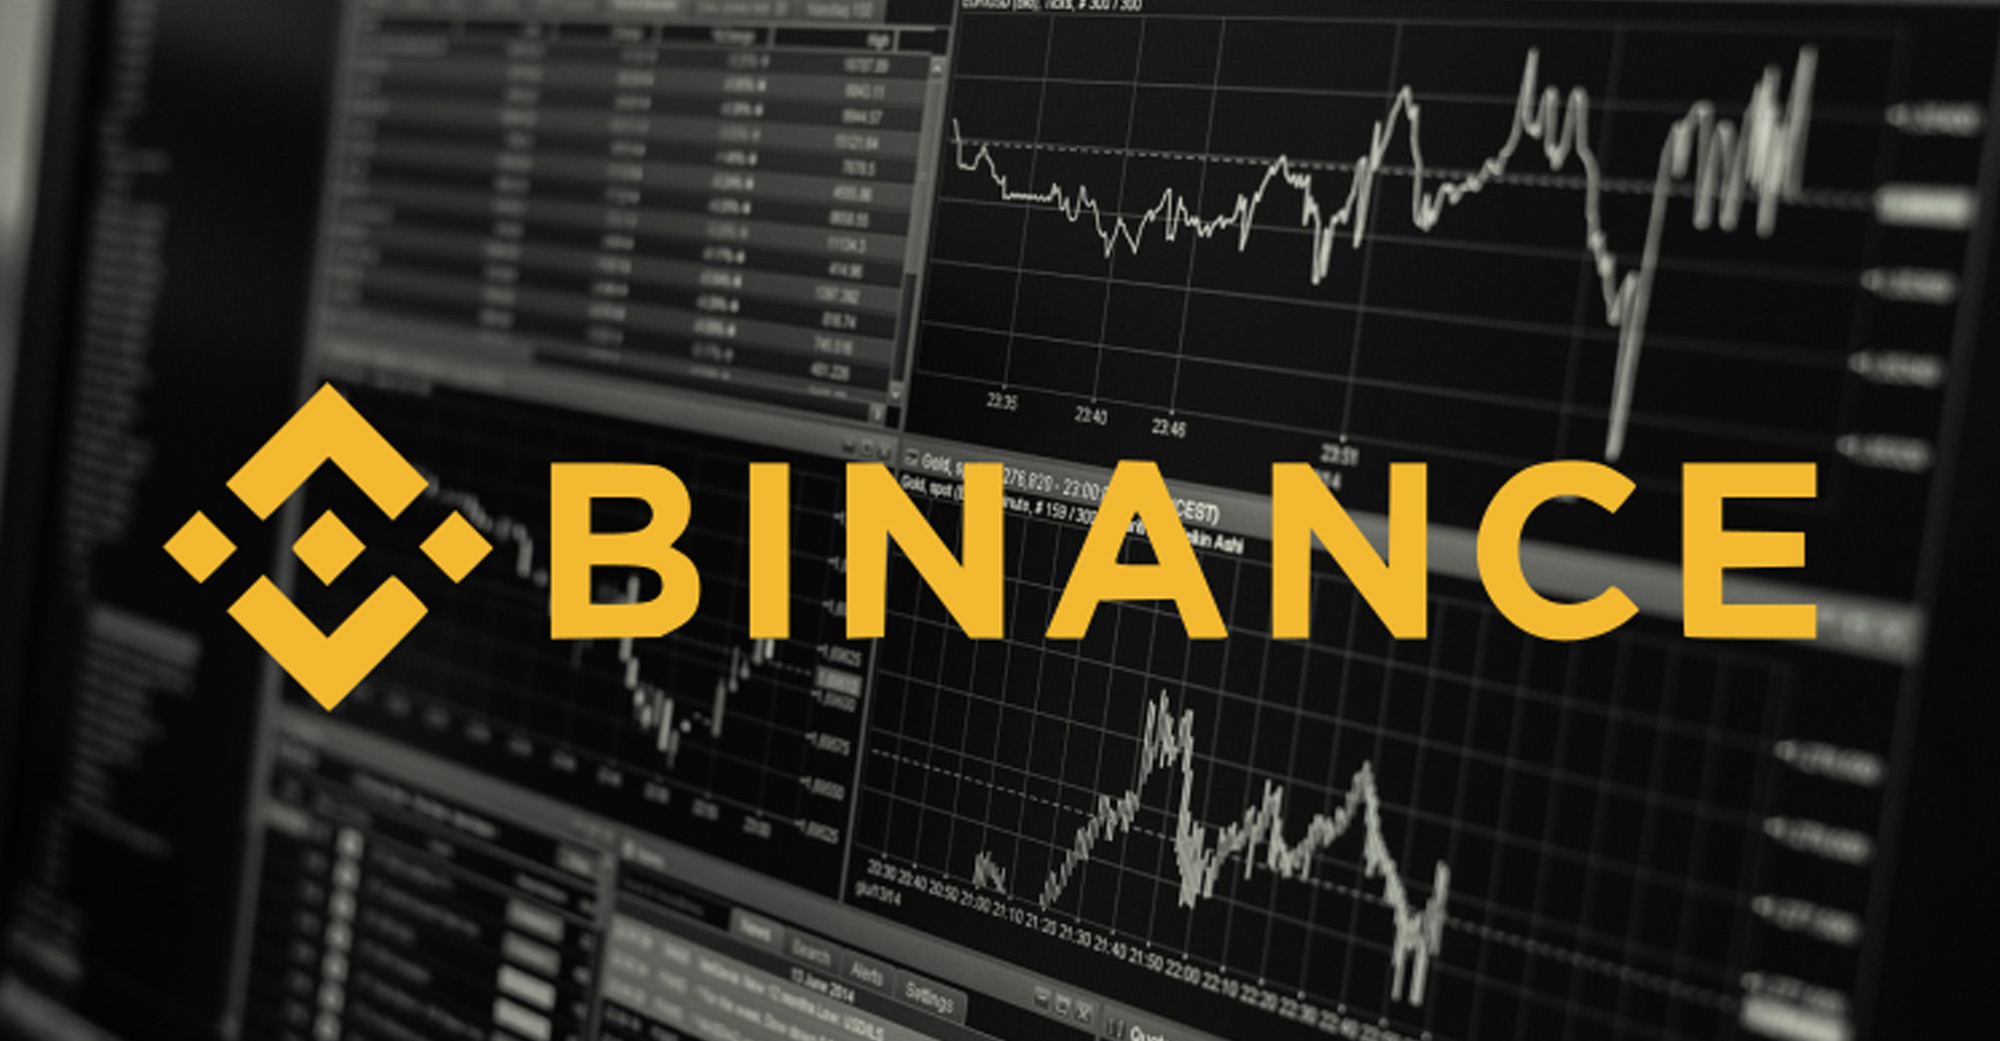 Binance Immense XRP Holdings Exposed In POR Report